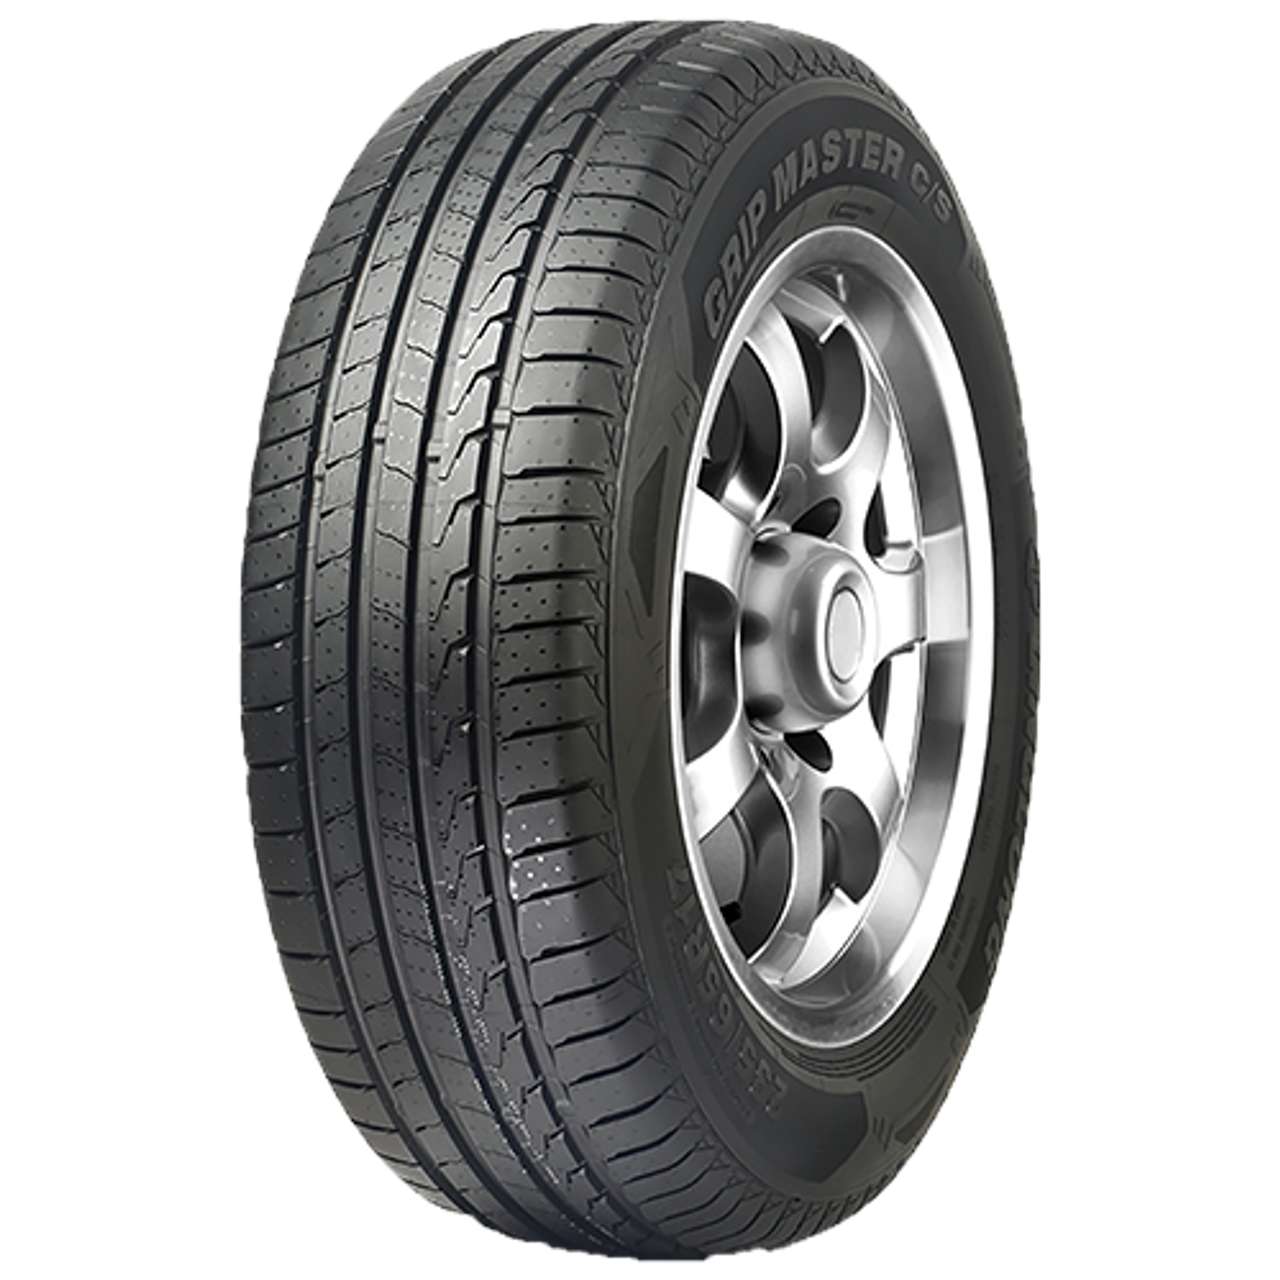 LINGLONG GRIP MASTER C/S 245/70R16 111H BSW XL